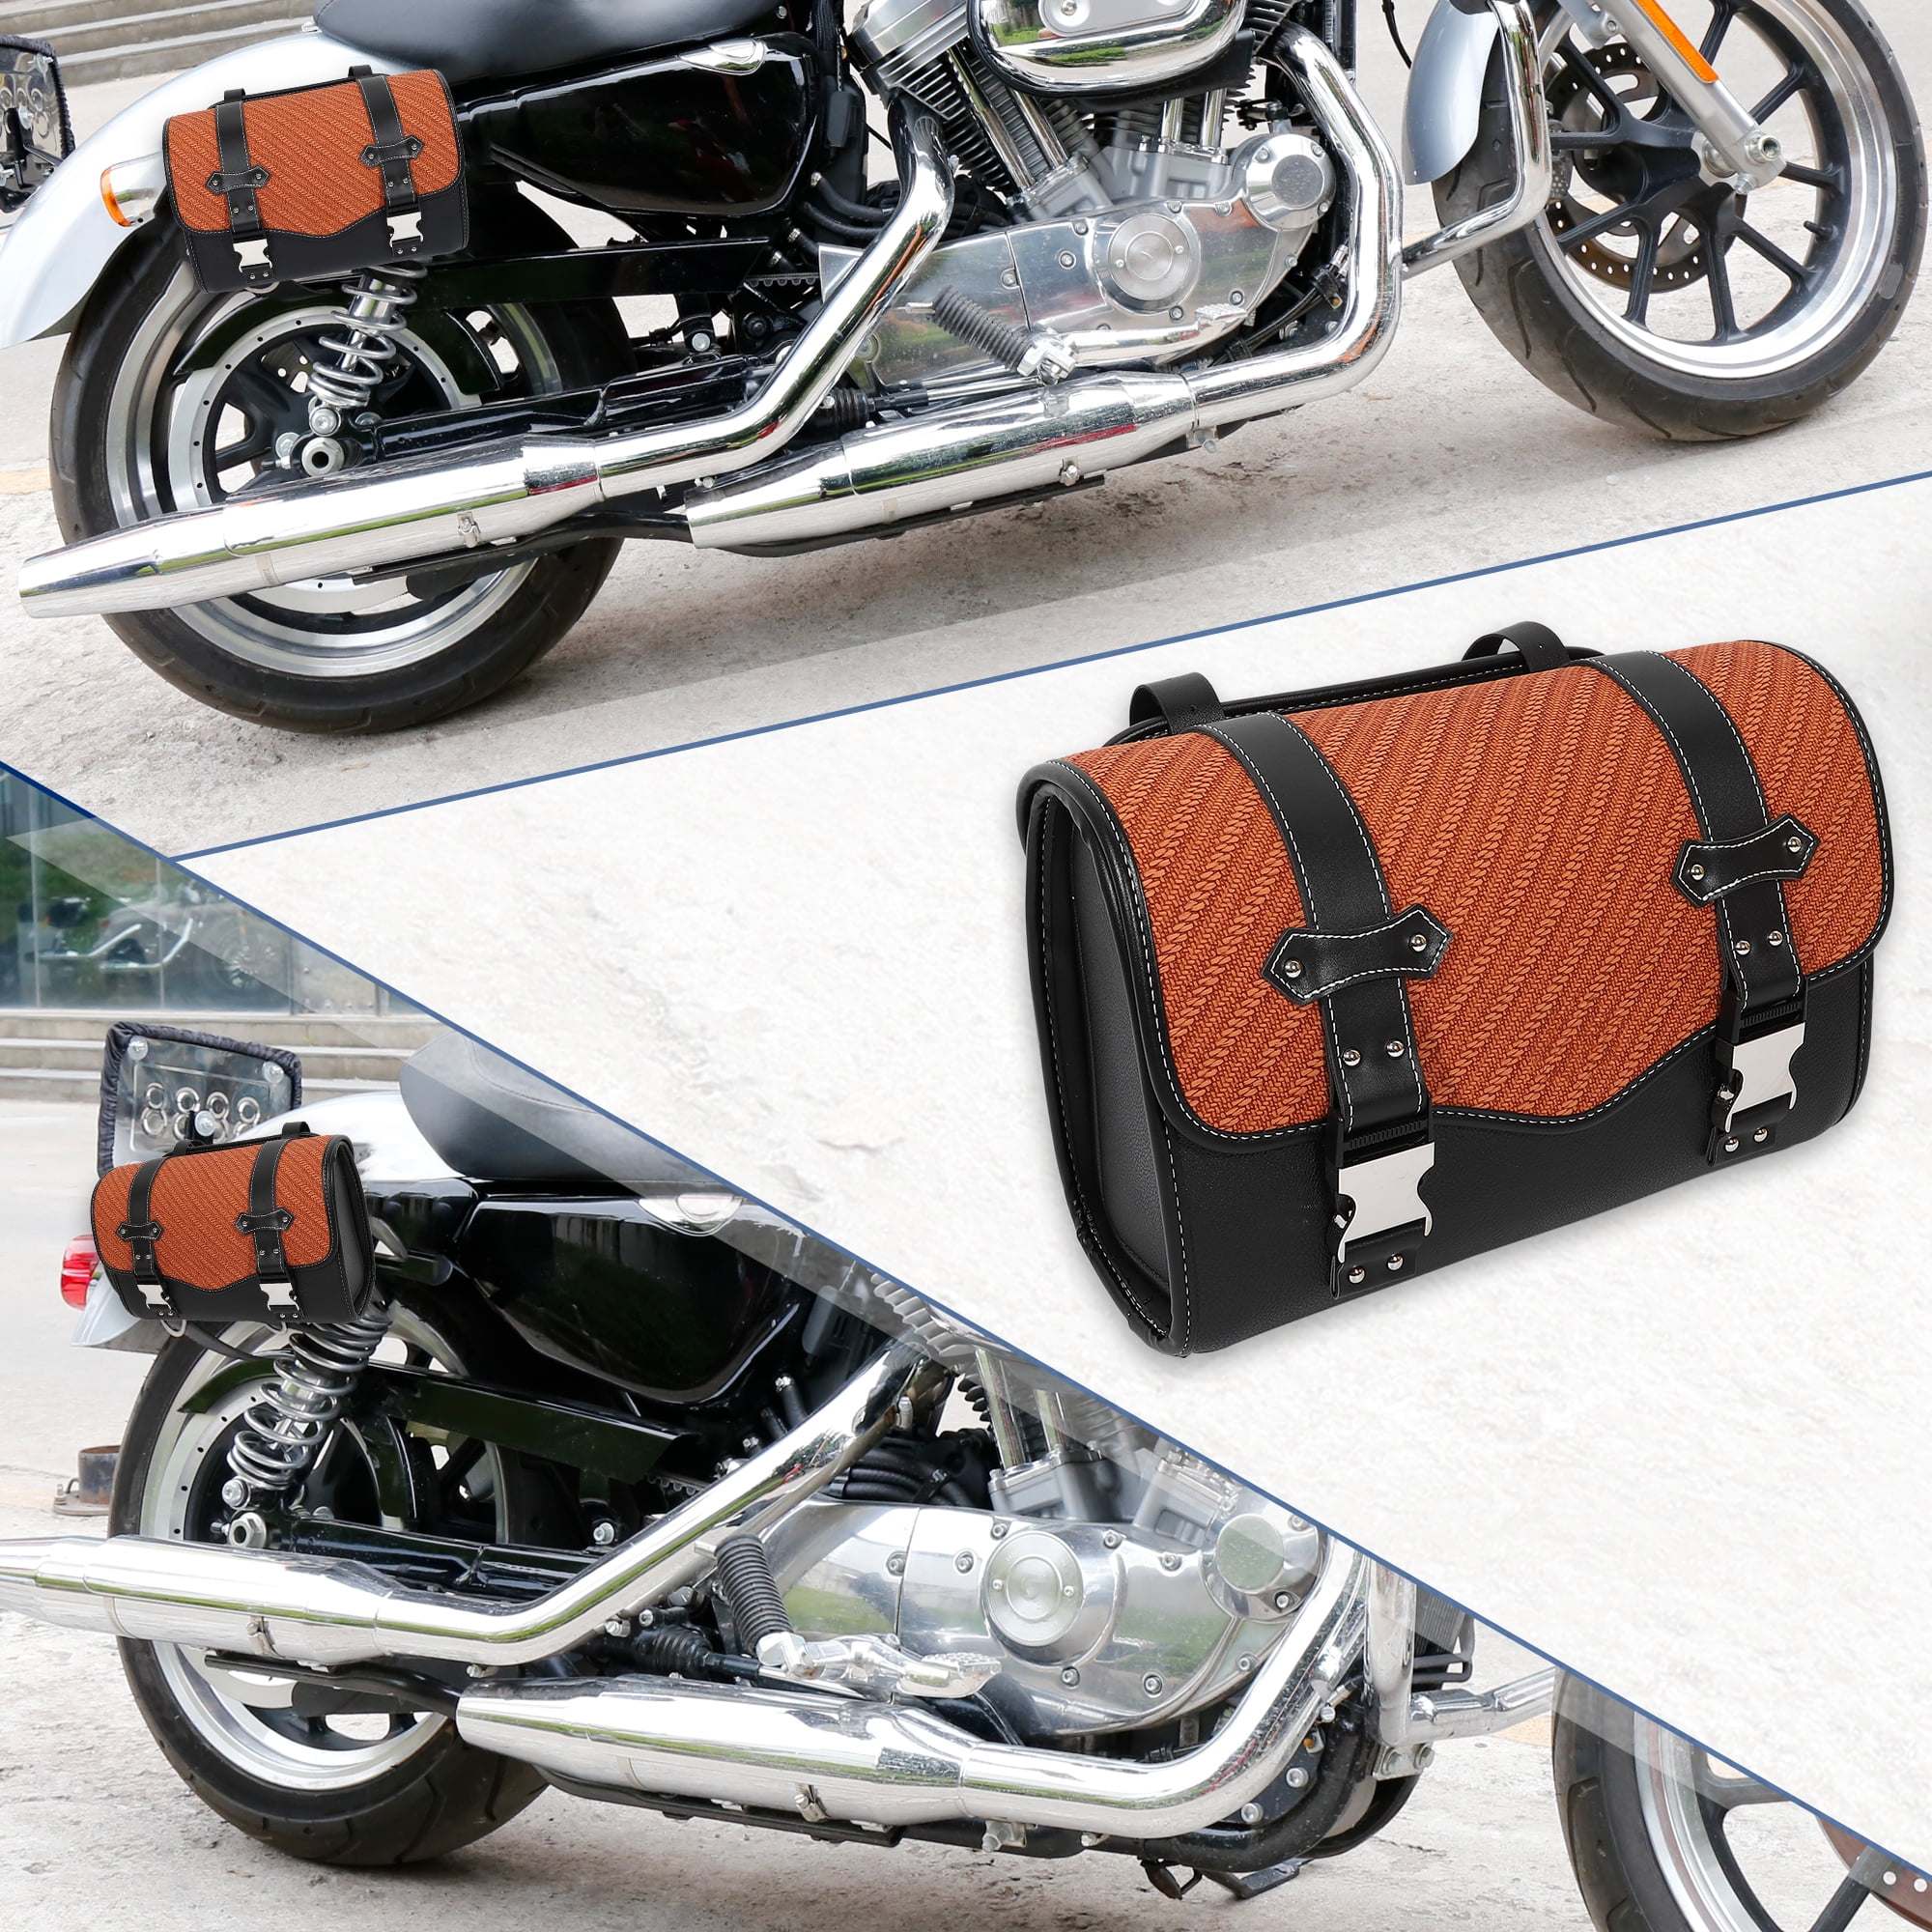 Unique Bargains Universal Motorcycle Handlebar Tool Bag Cycling Barrel Roll  Bag Pouch Waterproof Faux Leather